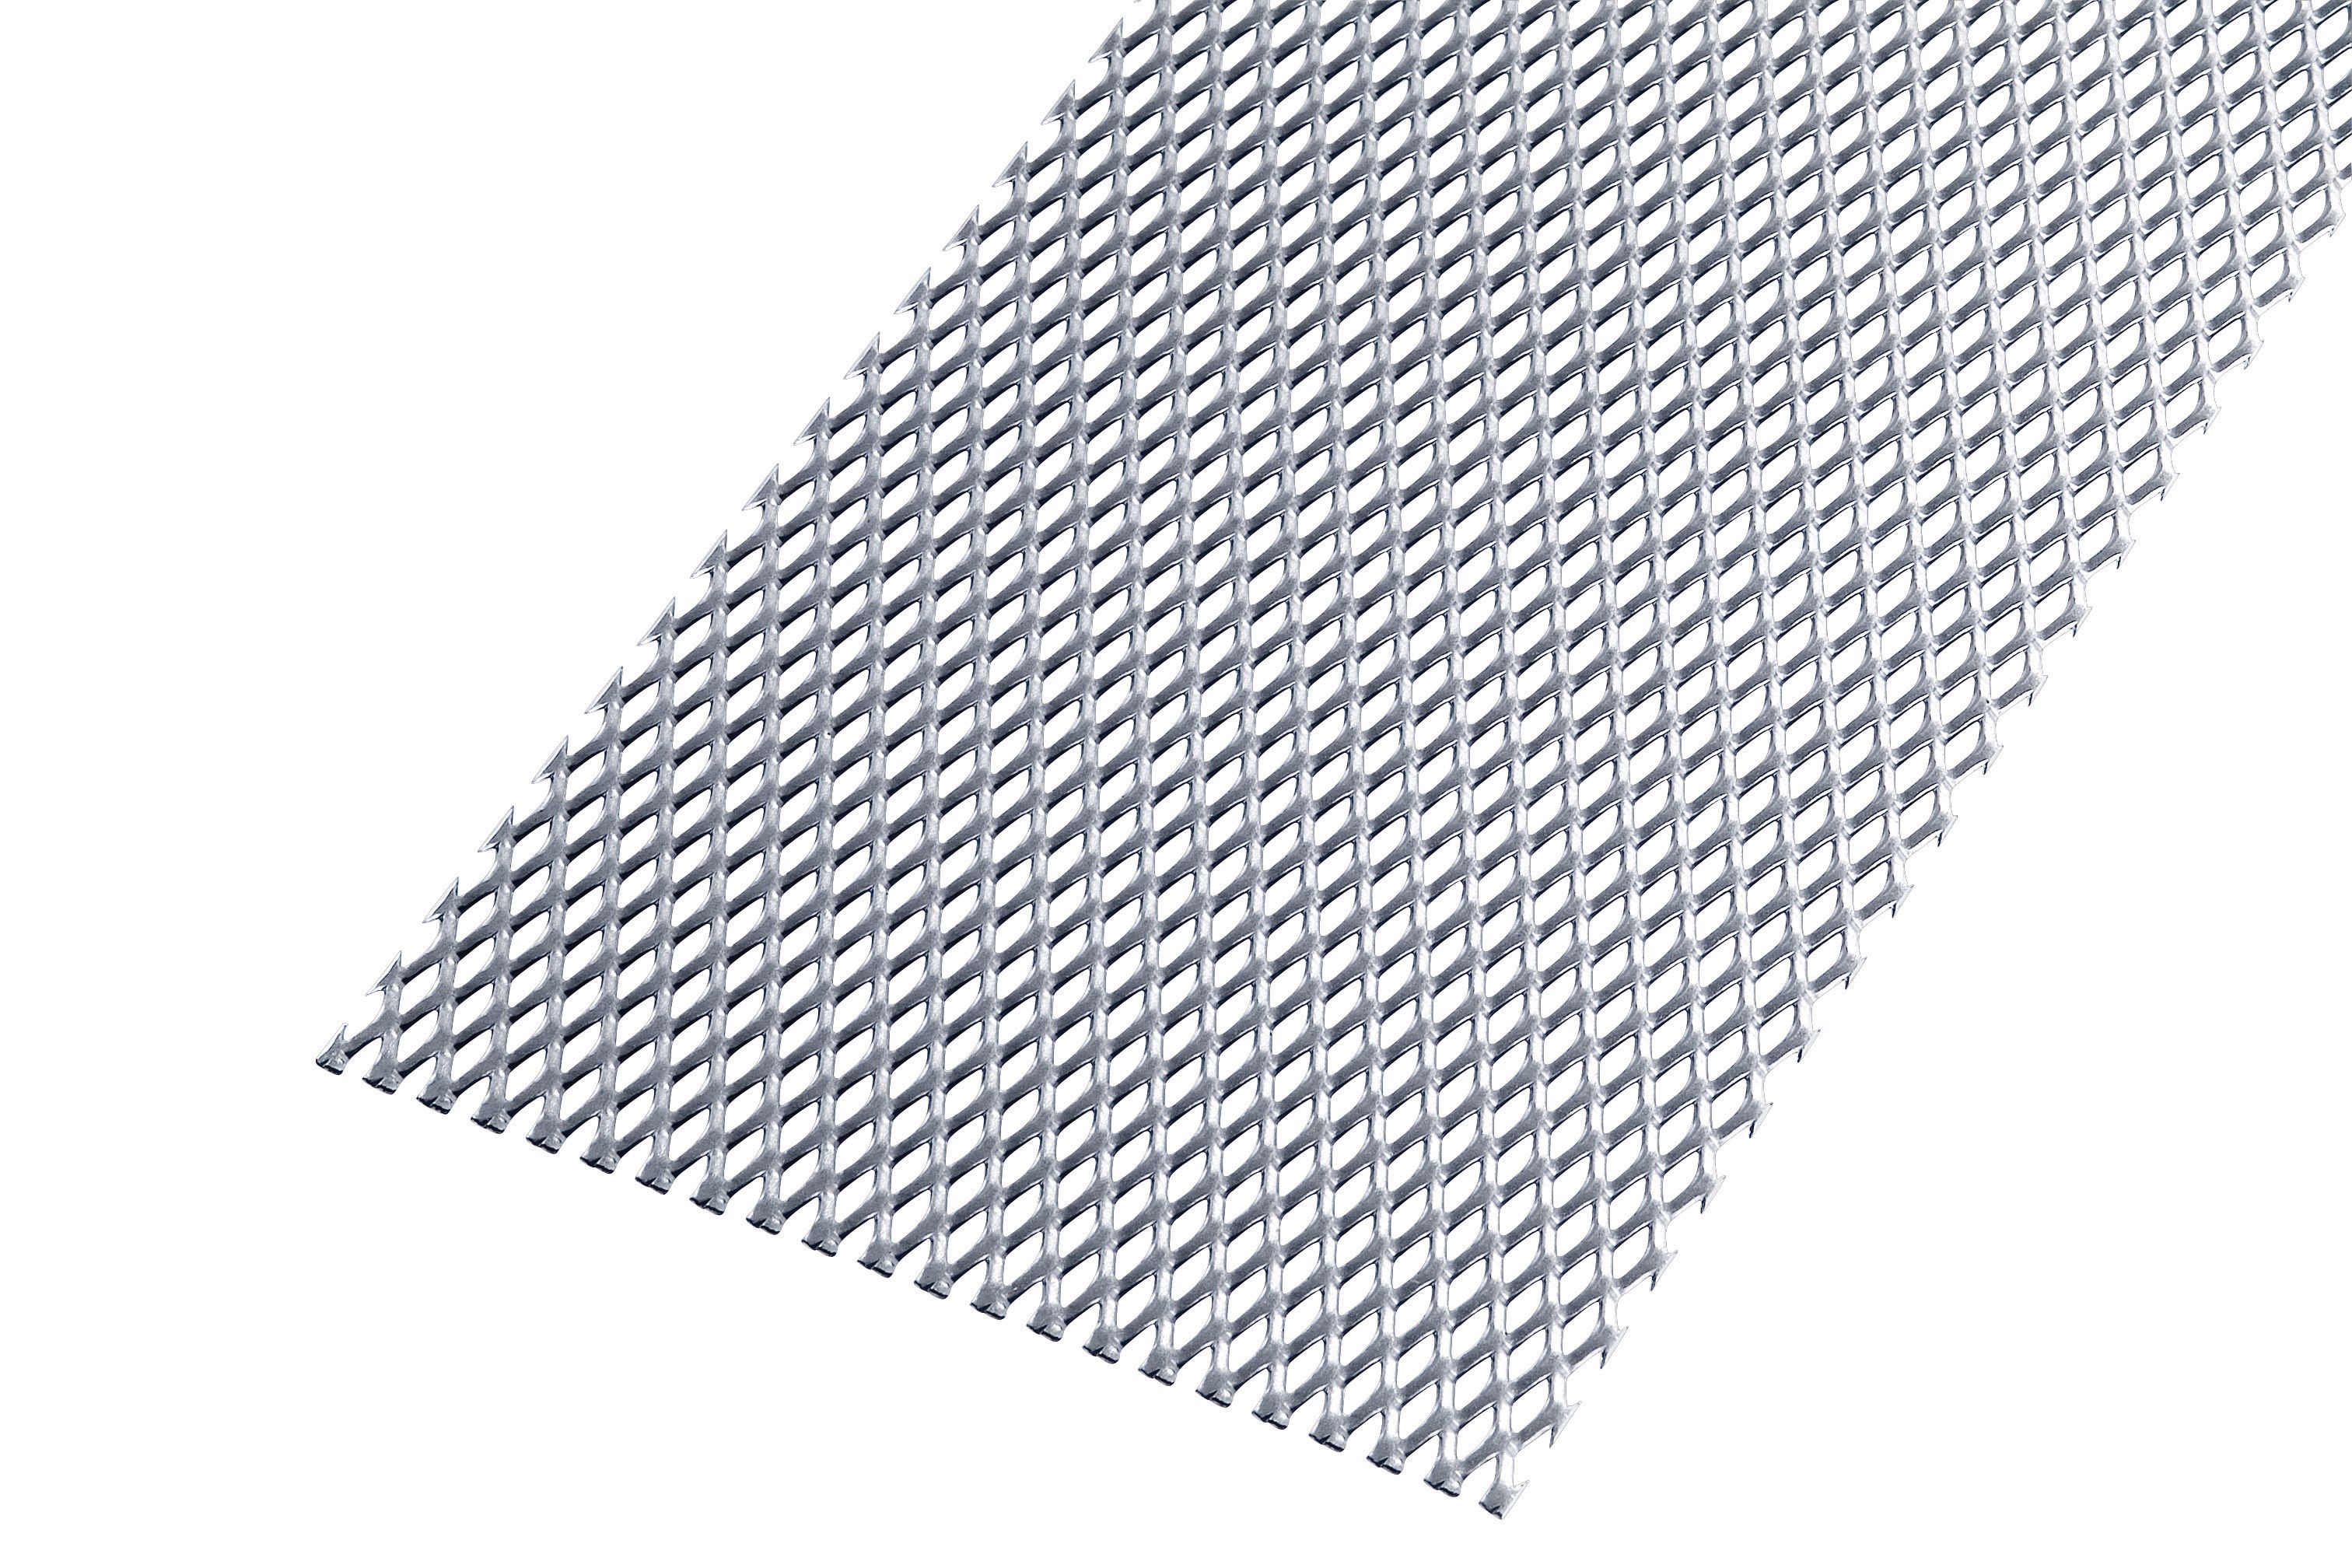 Rothley Perforated Steel Stretched Metal Sheet - 200 x 1000mm